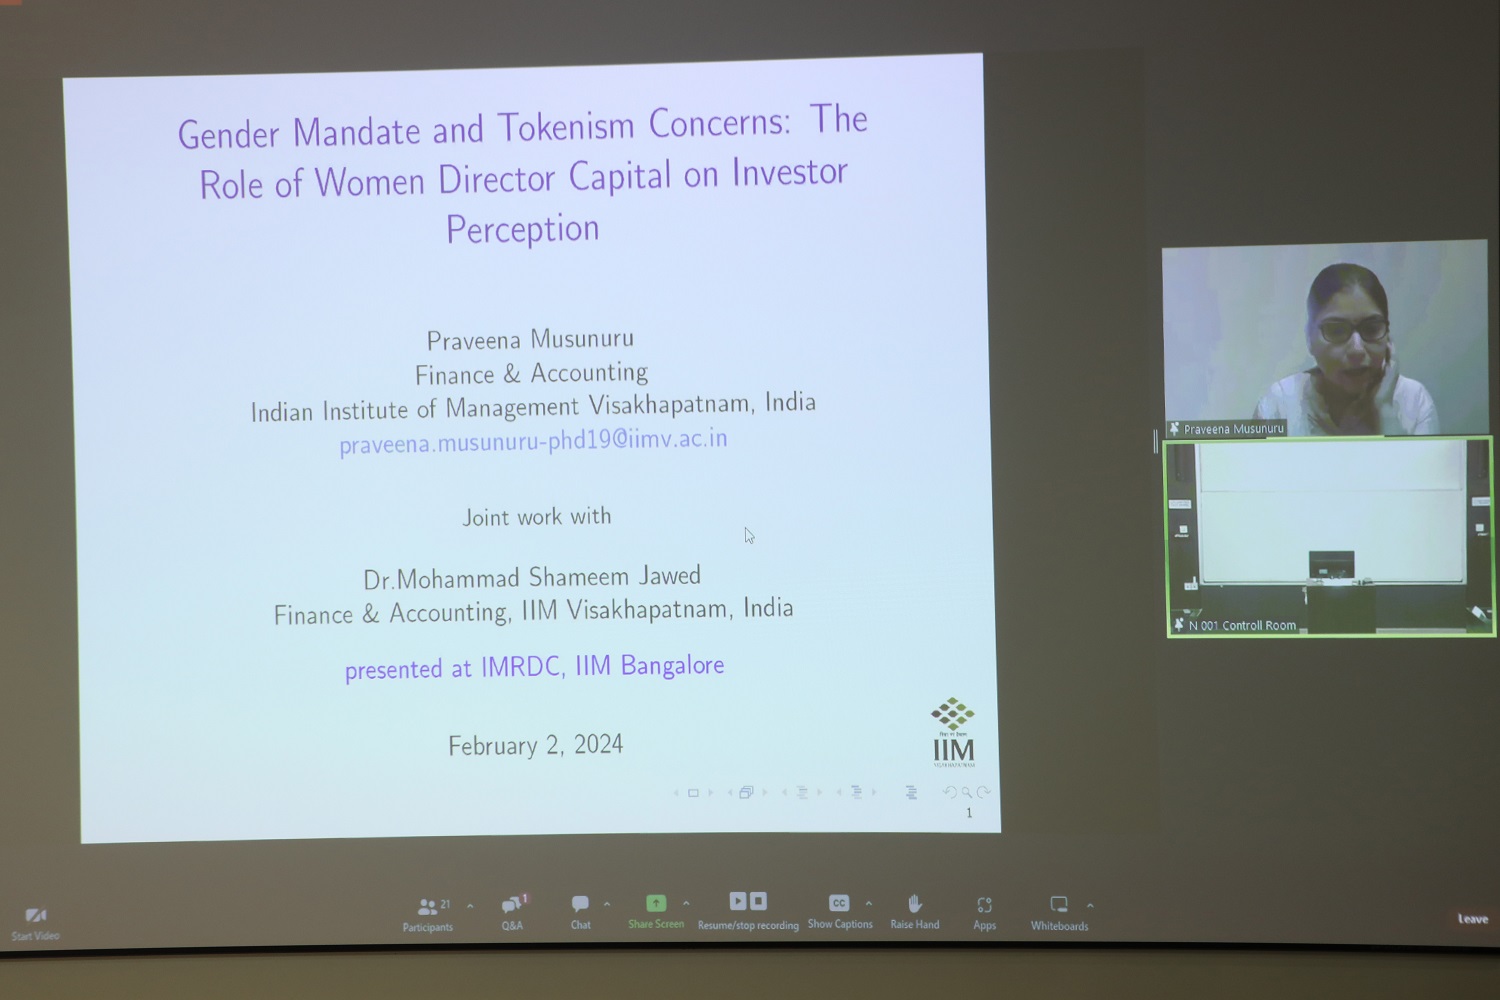 Praveena Musunuru, IIM Visakhapatnam, presents her paper titled, ‘Gender mandate and tokenism concerns: The role of women director capital on investor perception’, at the IMR Doctoral Conference, at IIMB on 2nd February 2024.